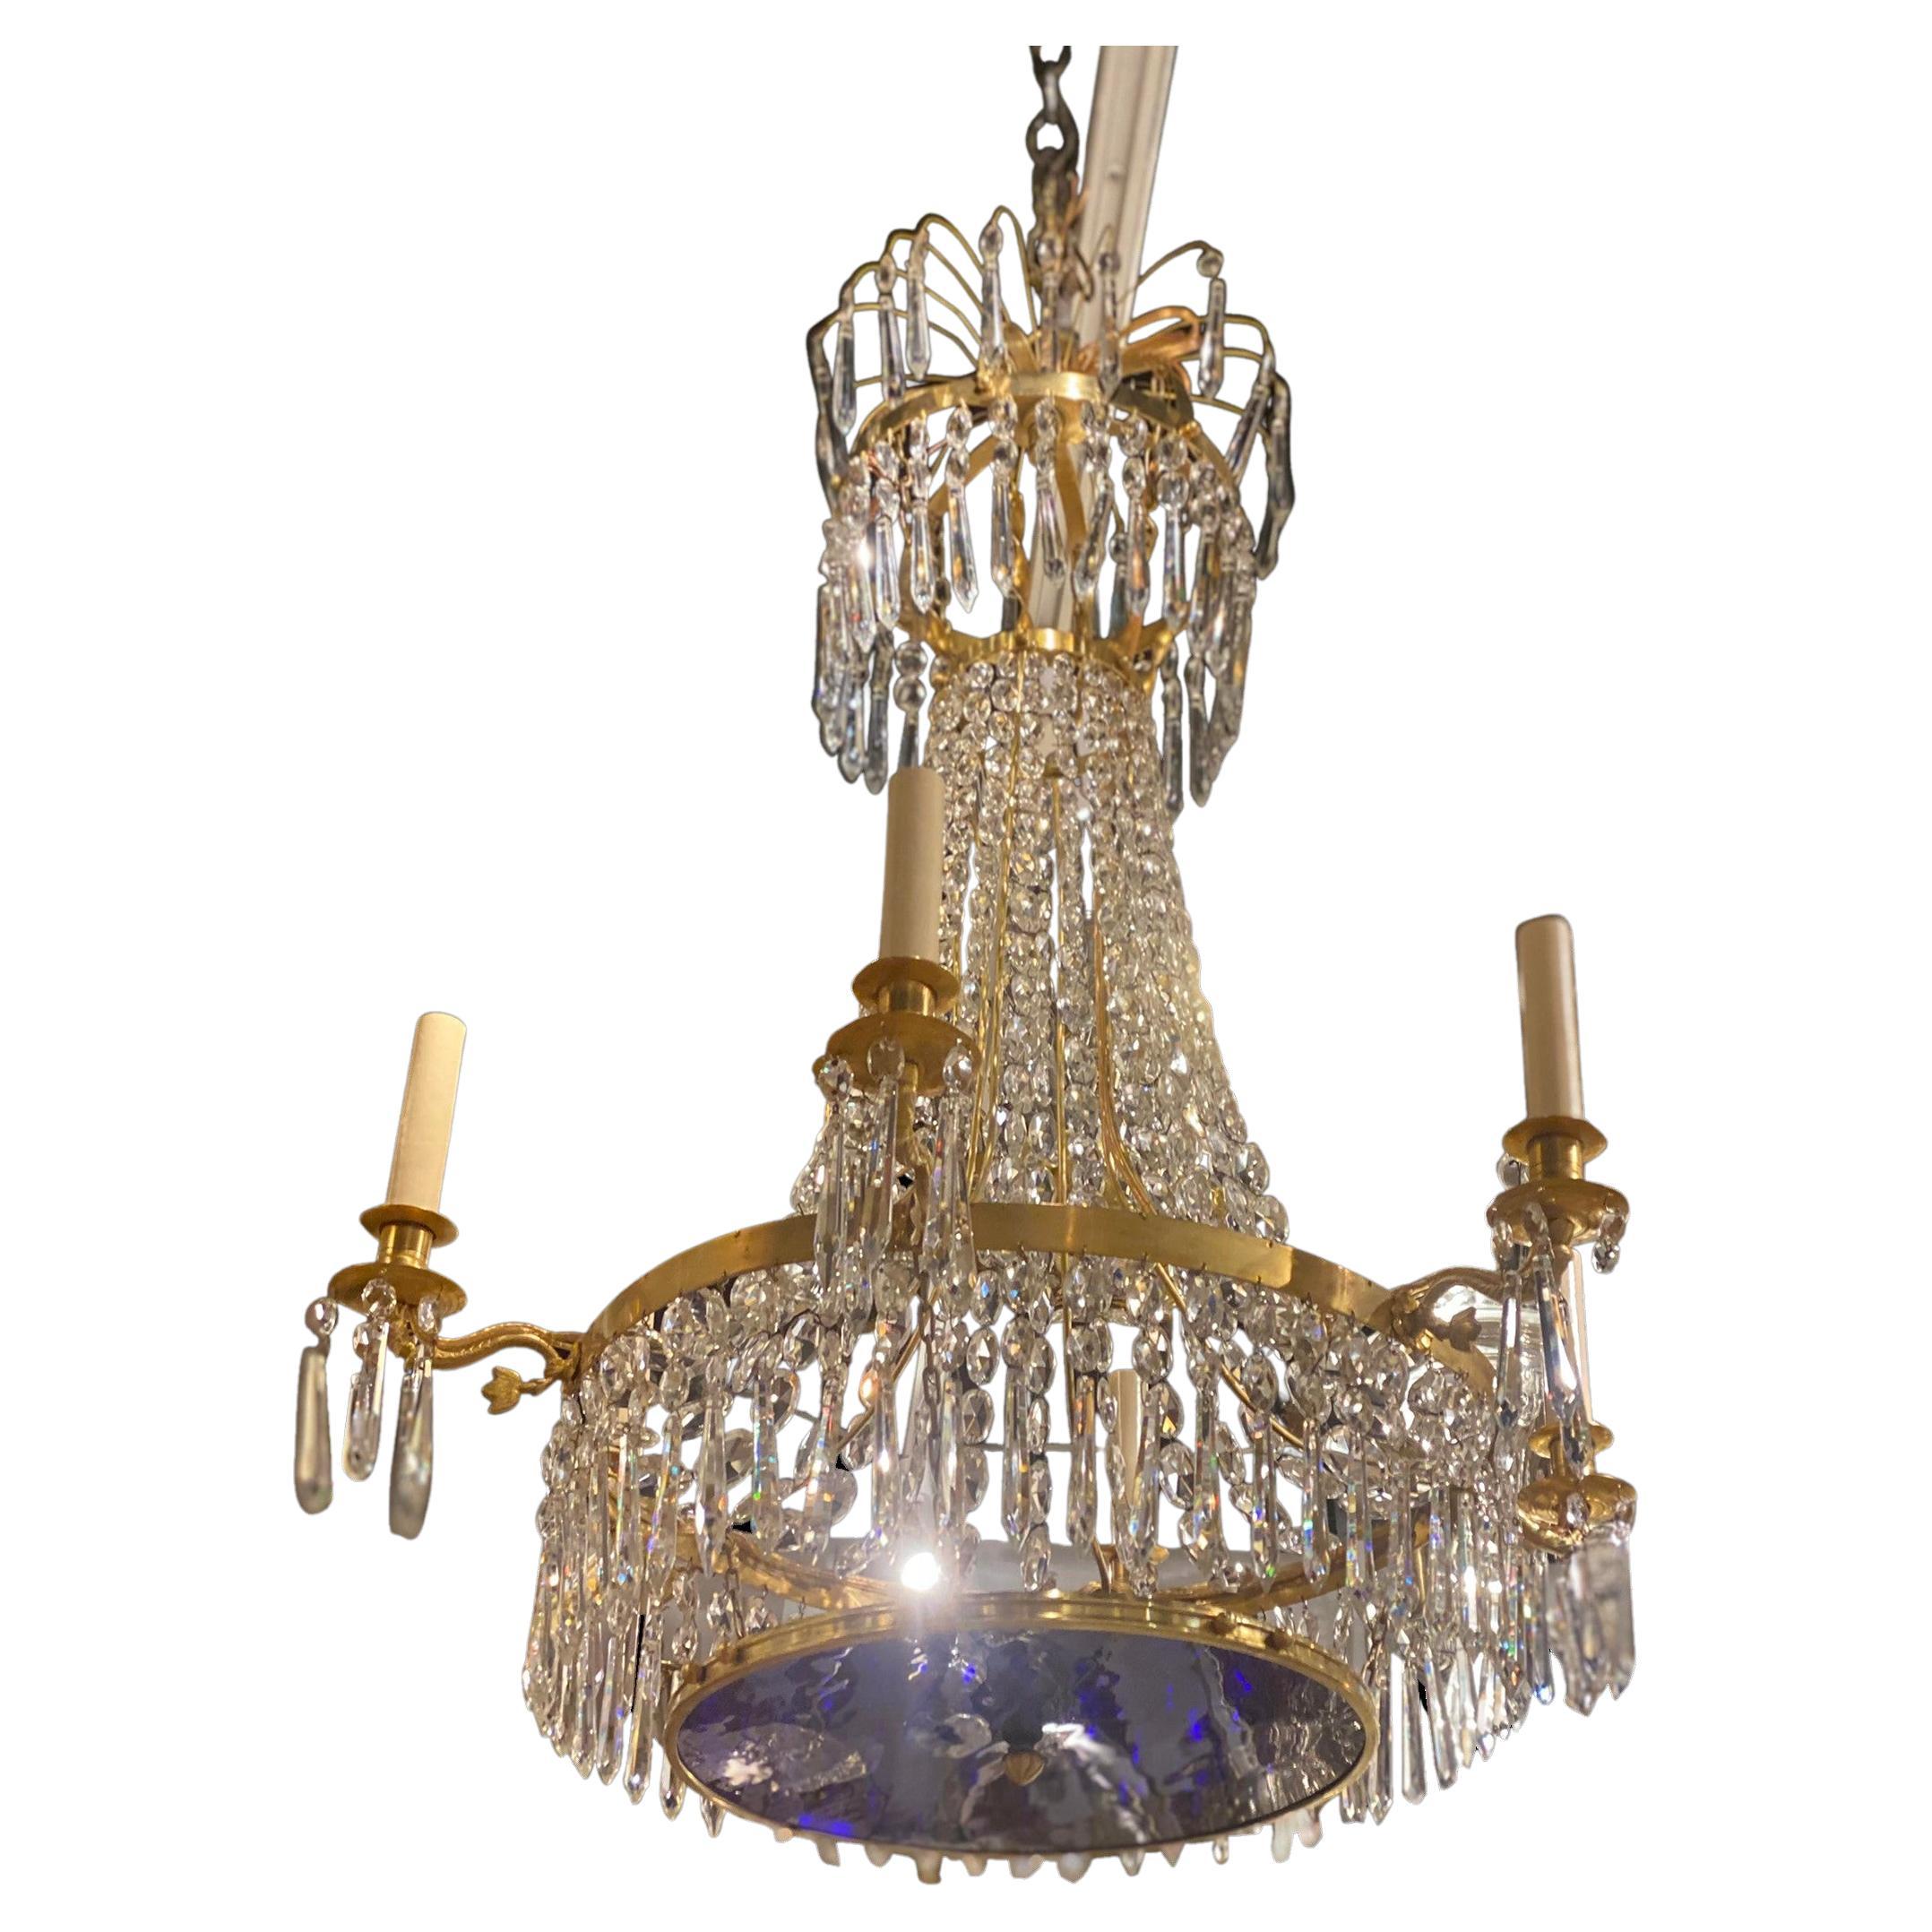 1900's Swedish Empire 6 Lights Chandelier with Cobalt Blue Glass In Good Condition For Sale In New York, NY